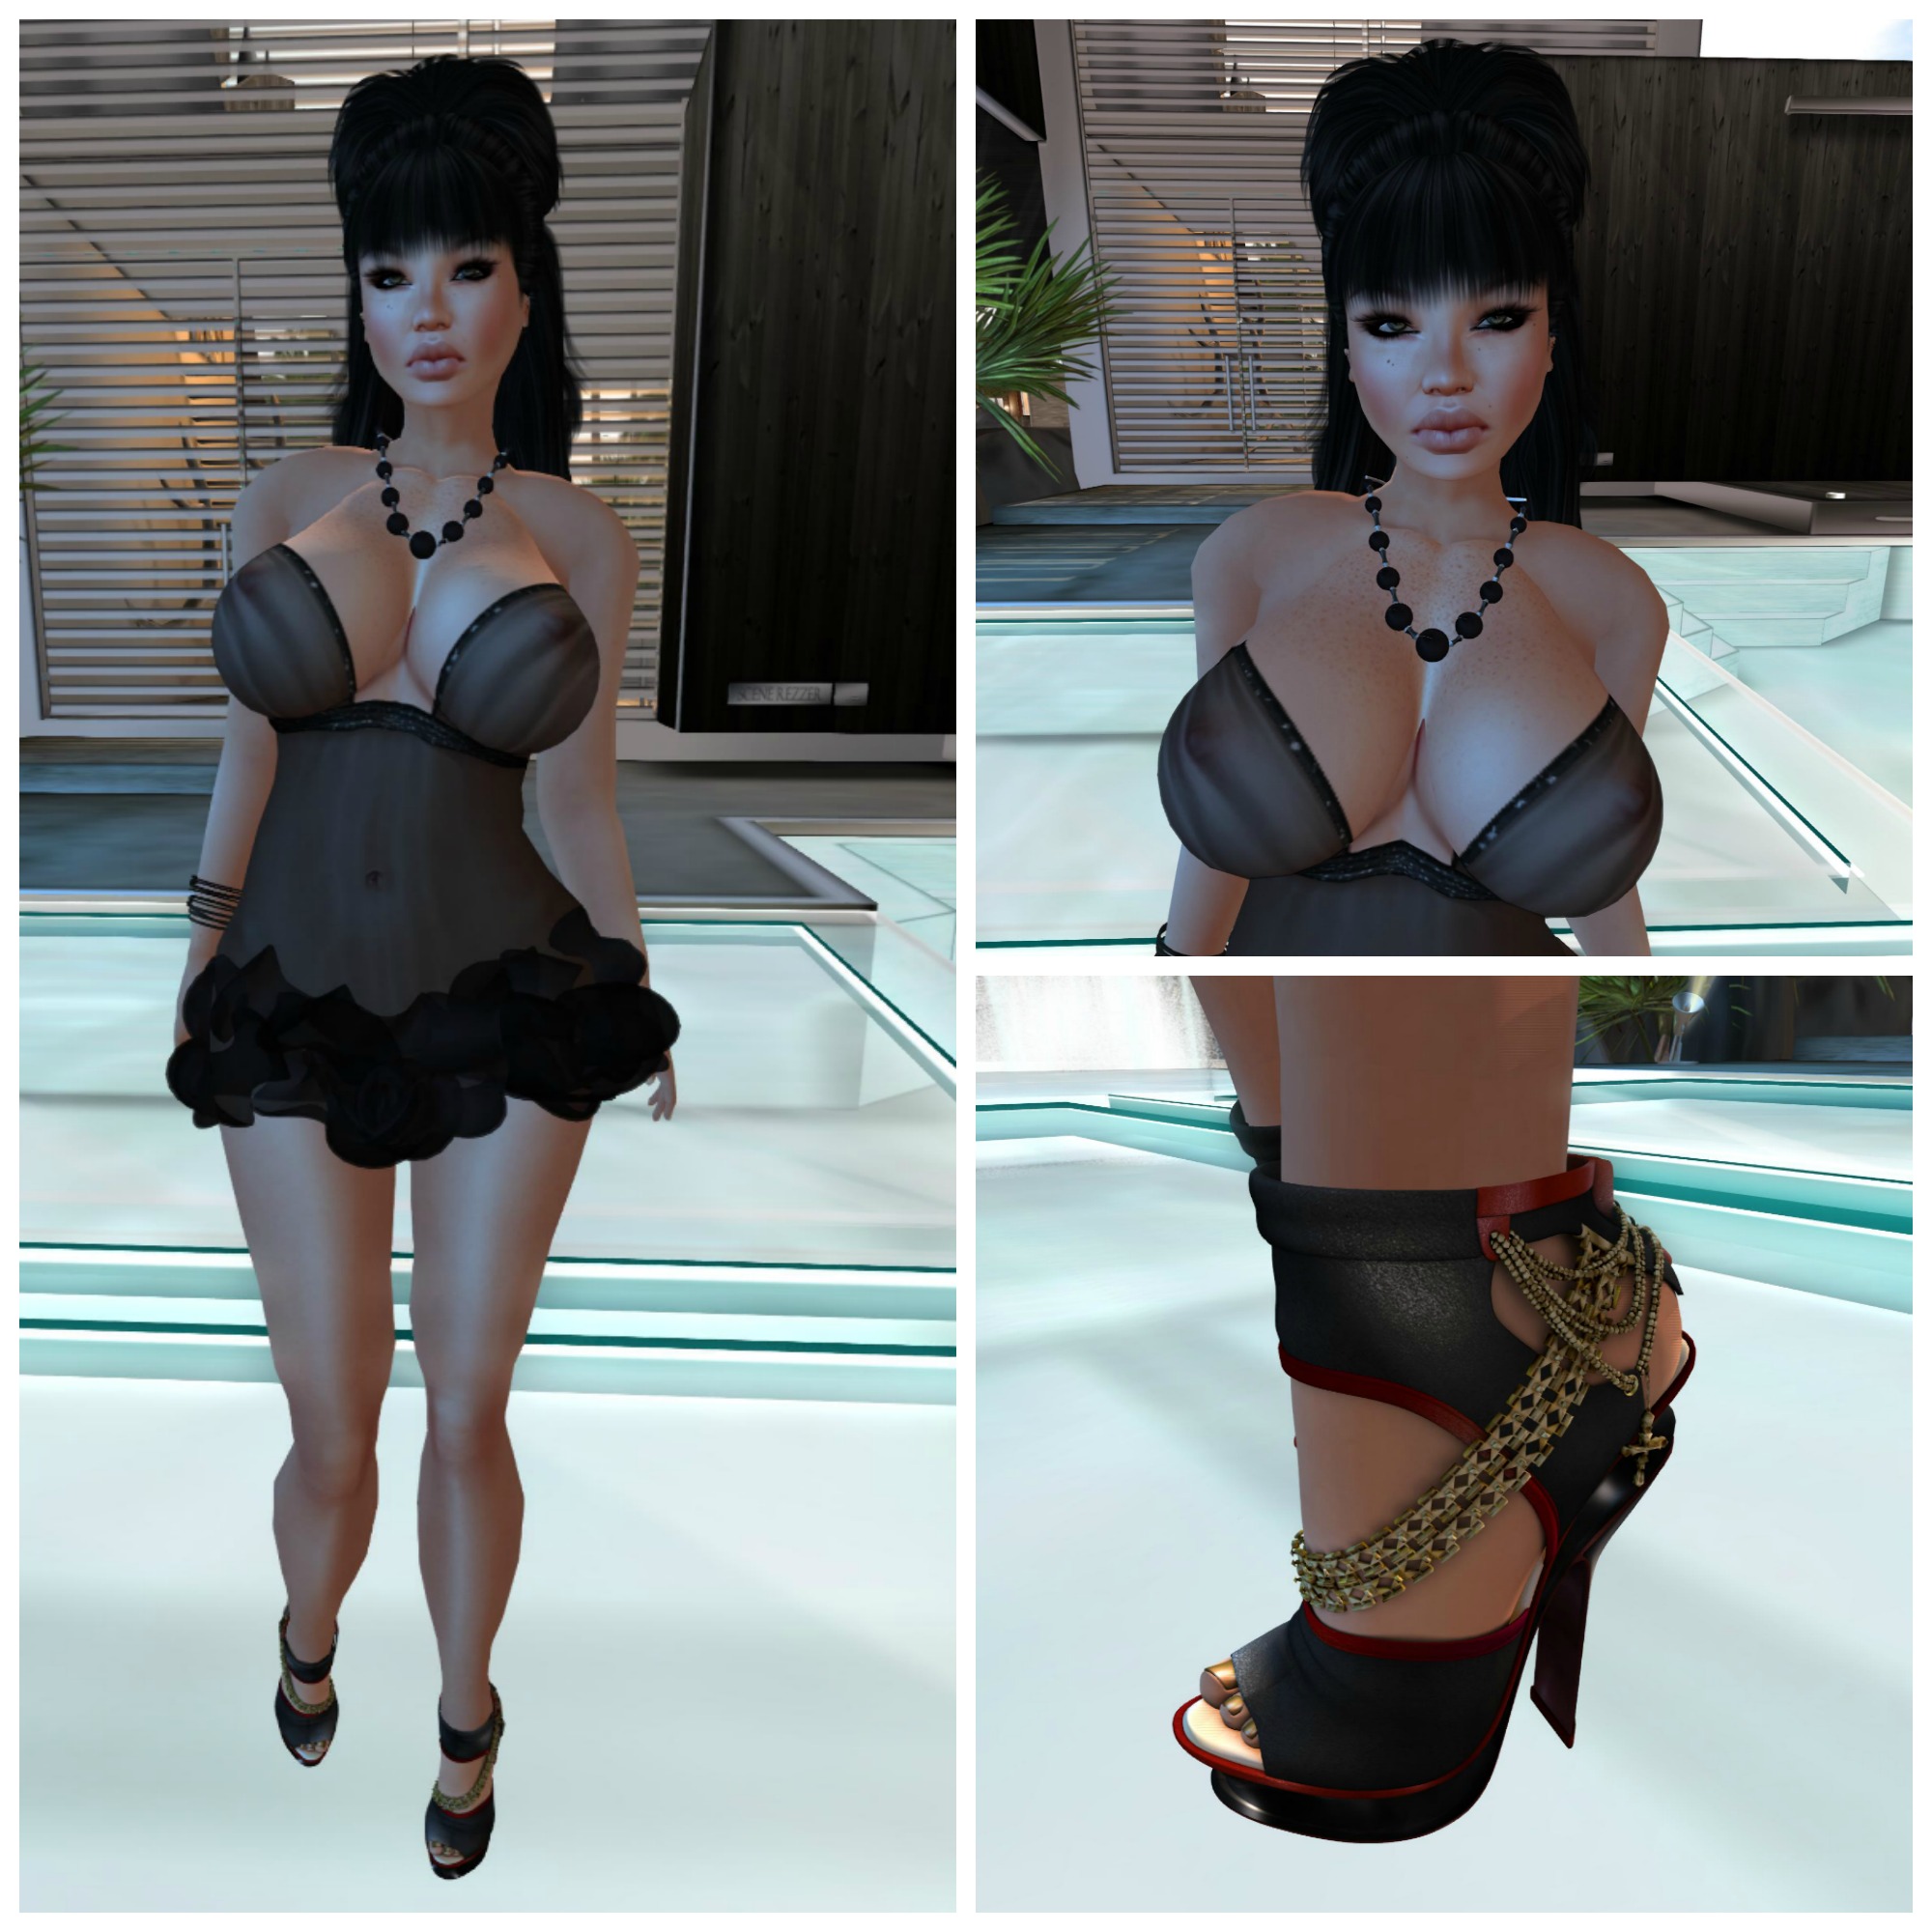 Boobies Planet -  .:[NMD]:. Gorgeous Black Sheer Dress feat 7 Deadly Skins